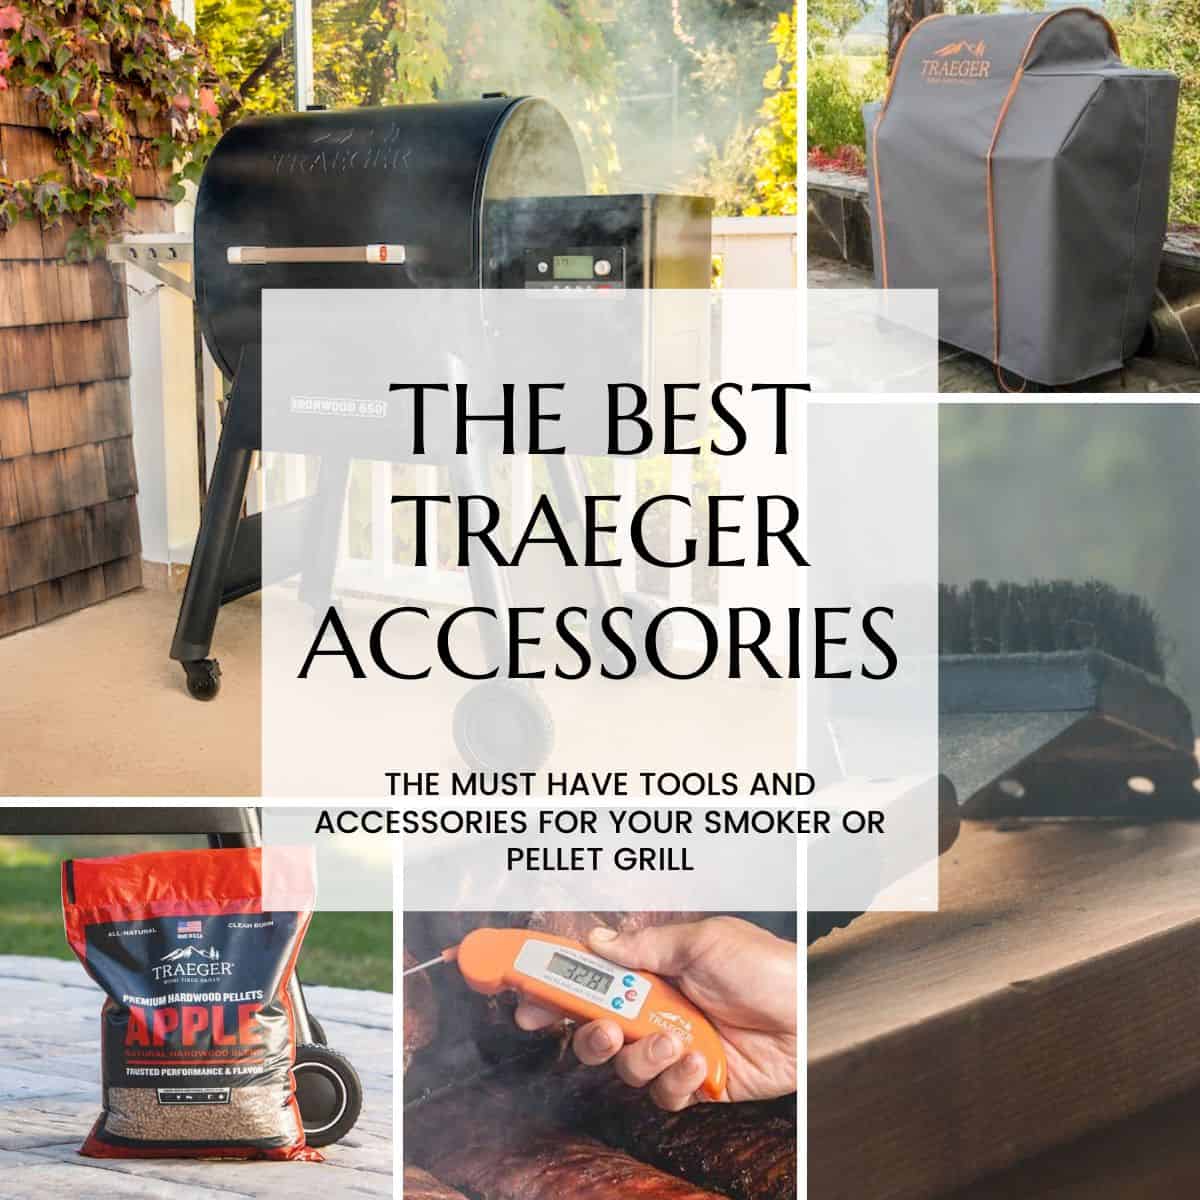 A collage of the best traeger grilling accessories with a text overlay.